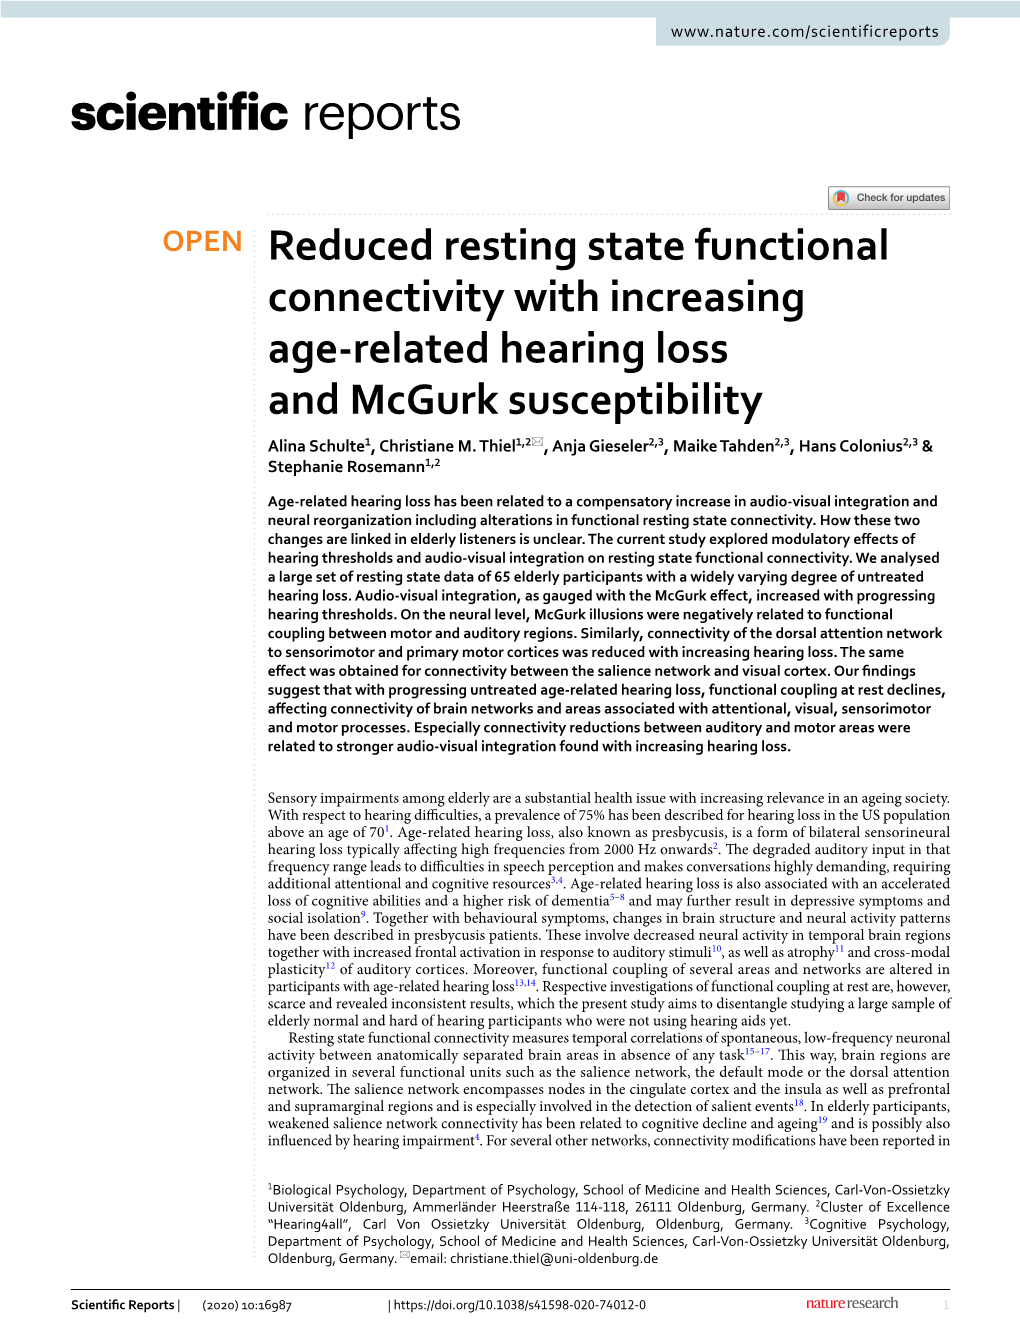 Reduced Resting State Functional Connectivity with Increasing Age‑Related Hearing Loss and Mcgurk Susceptibility Alina Schulte1, Christiane M